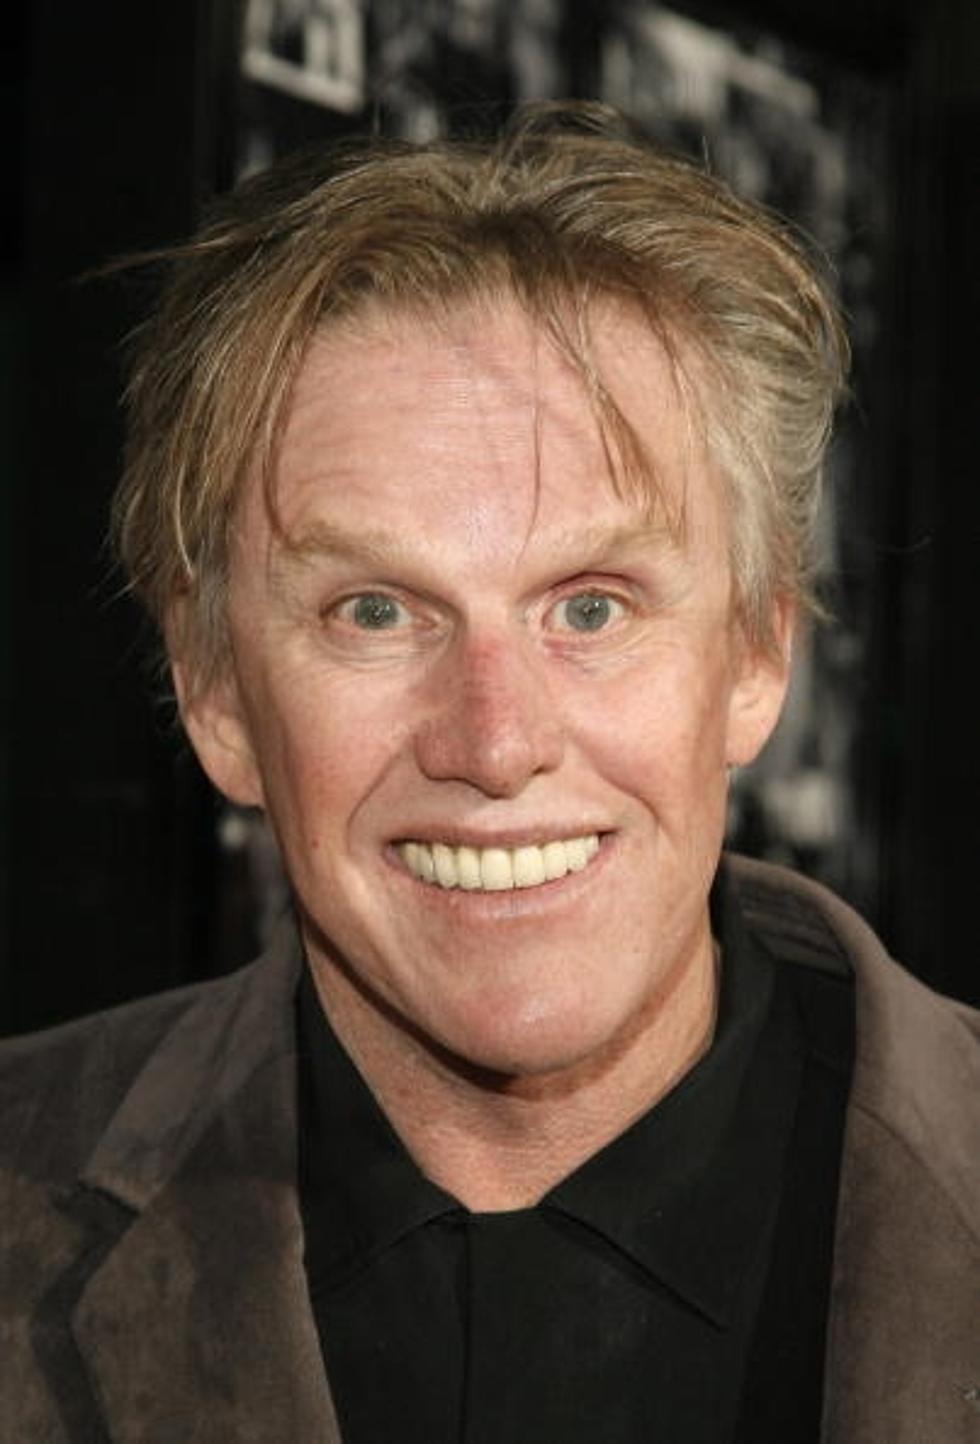 Can’t Get Enough Of The Gary Busey Train-wreck? Try His GPS [VIDEO]